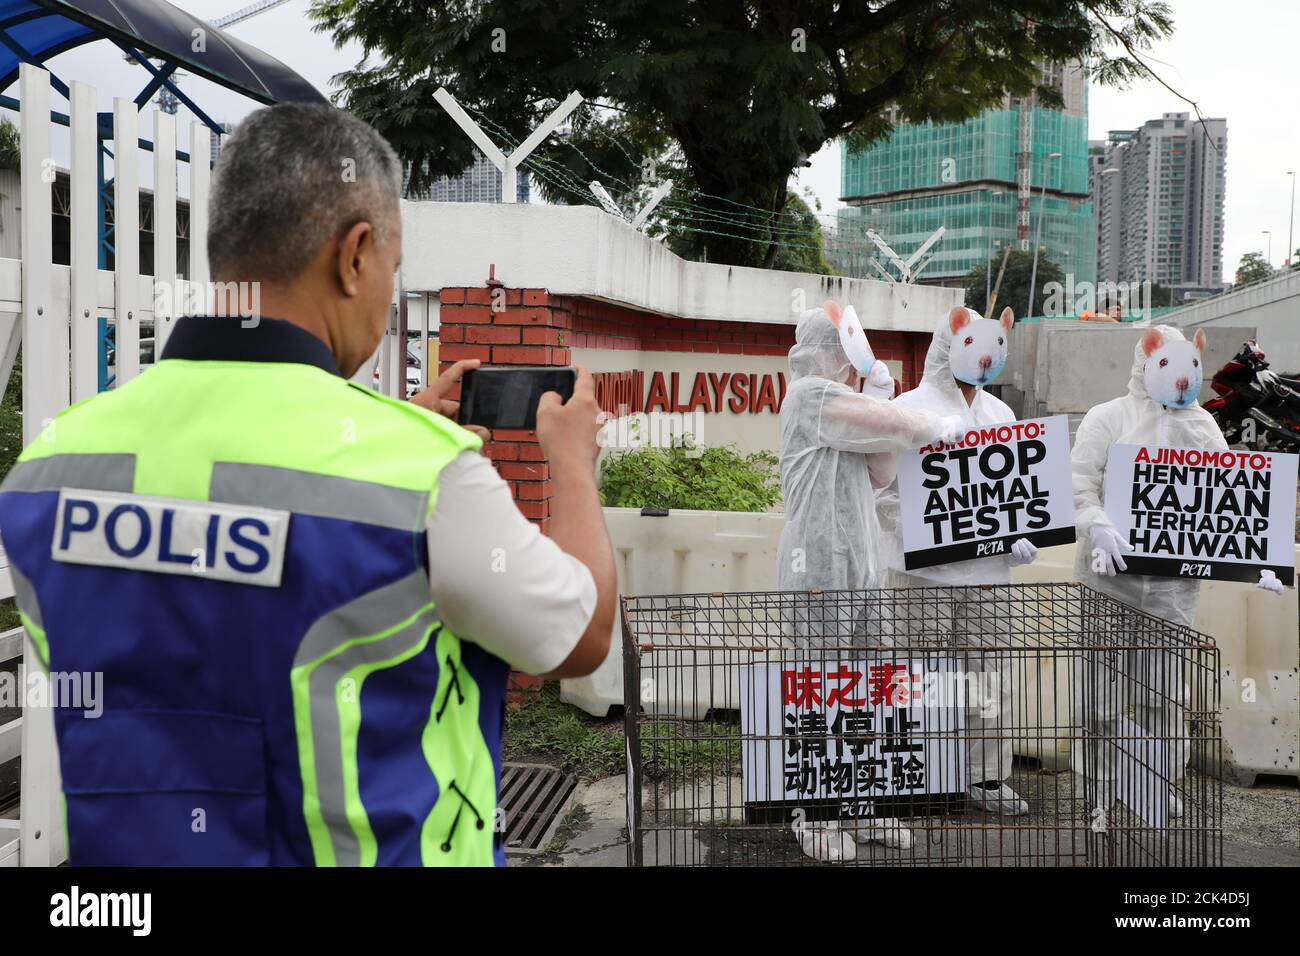 A police officer takes a picture of activists from PETA (People for the Ethical Treatment of Animals), dressed as rats, protesting against what they say is Ajinomoto's use of animal testing outside the company's headquarters in Kuala Lumpur, Malaysia, November 28, 2019. REUTERS/Lim Huey Teng Stock Photo